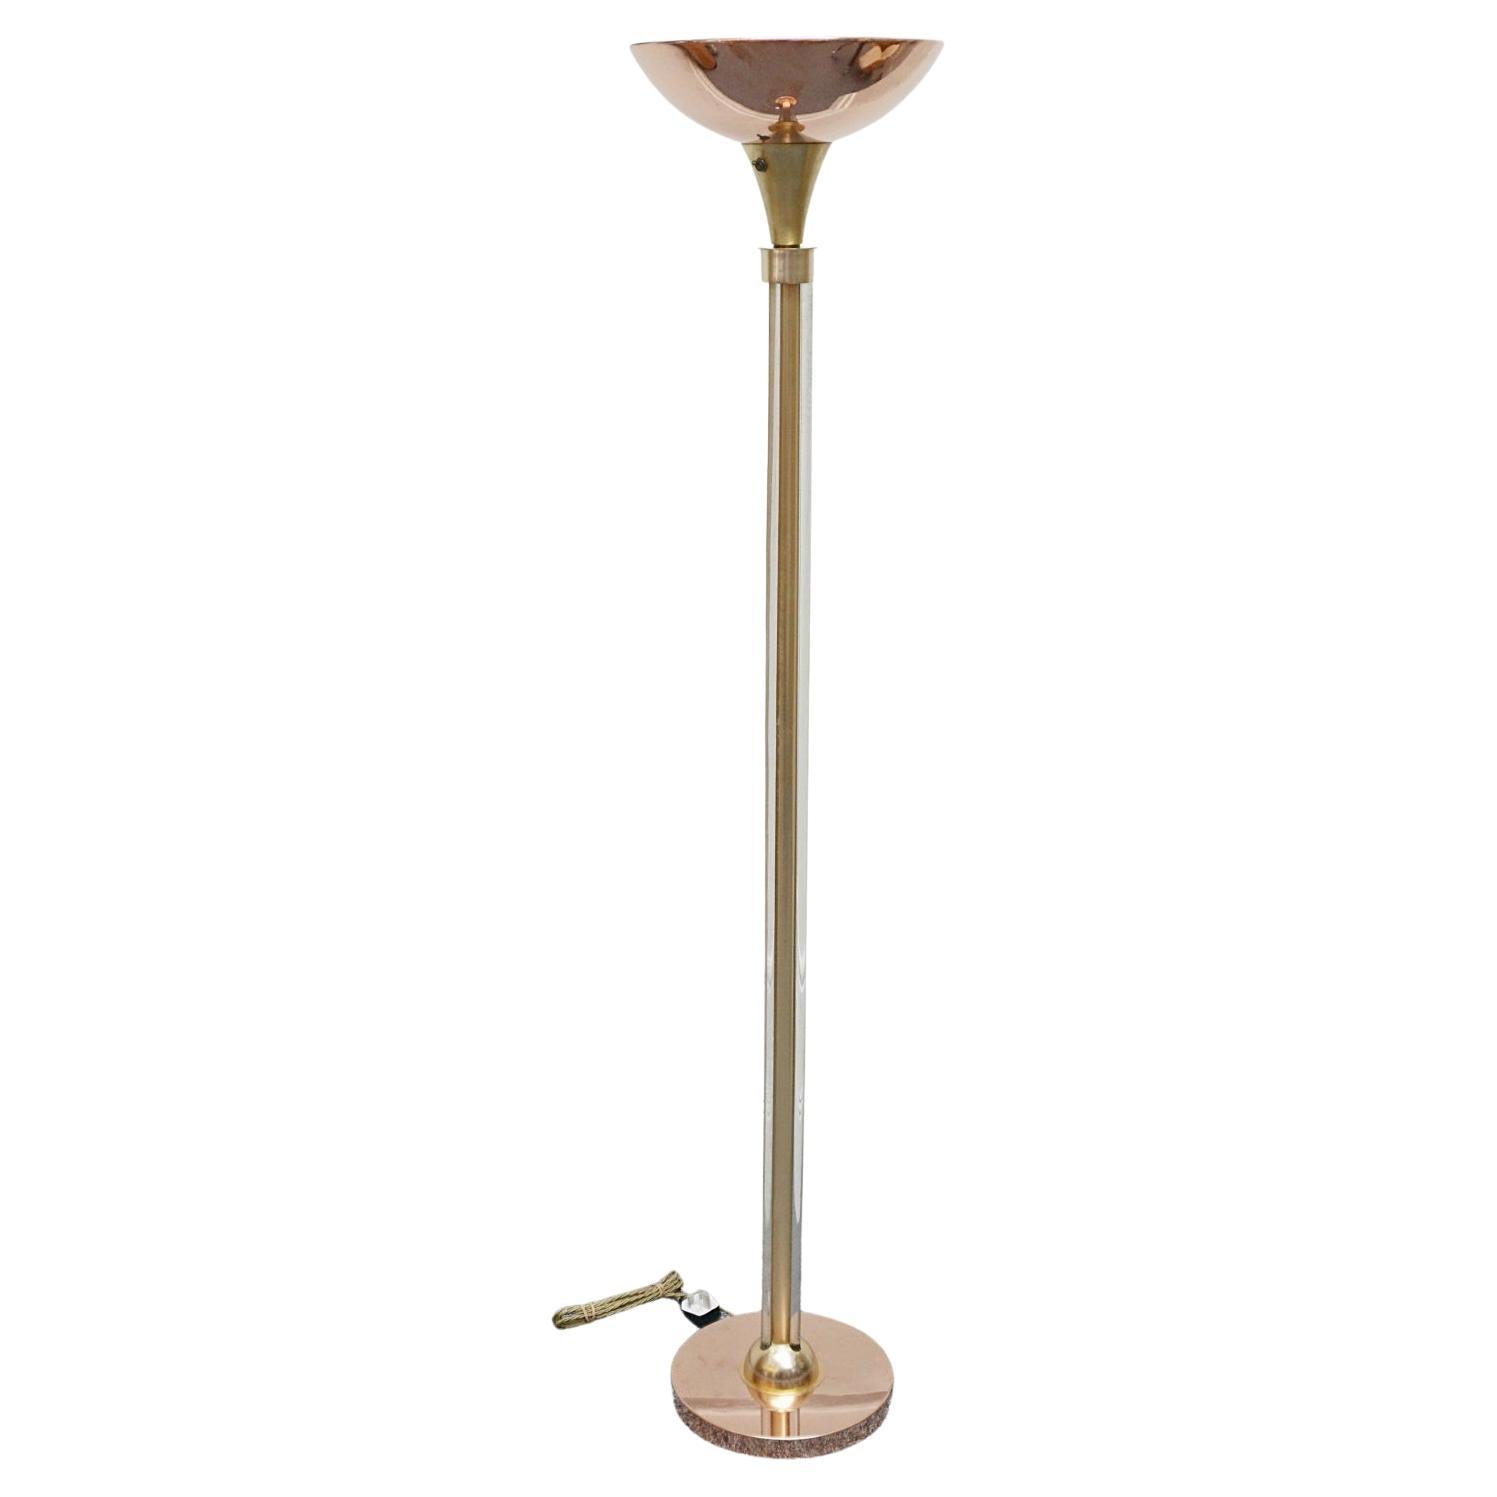 Art Deco Brass Copper and Glass Uplighter Floor Lamp For Sale